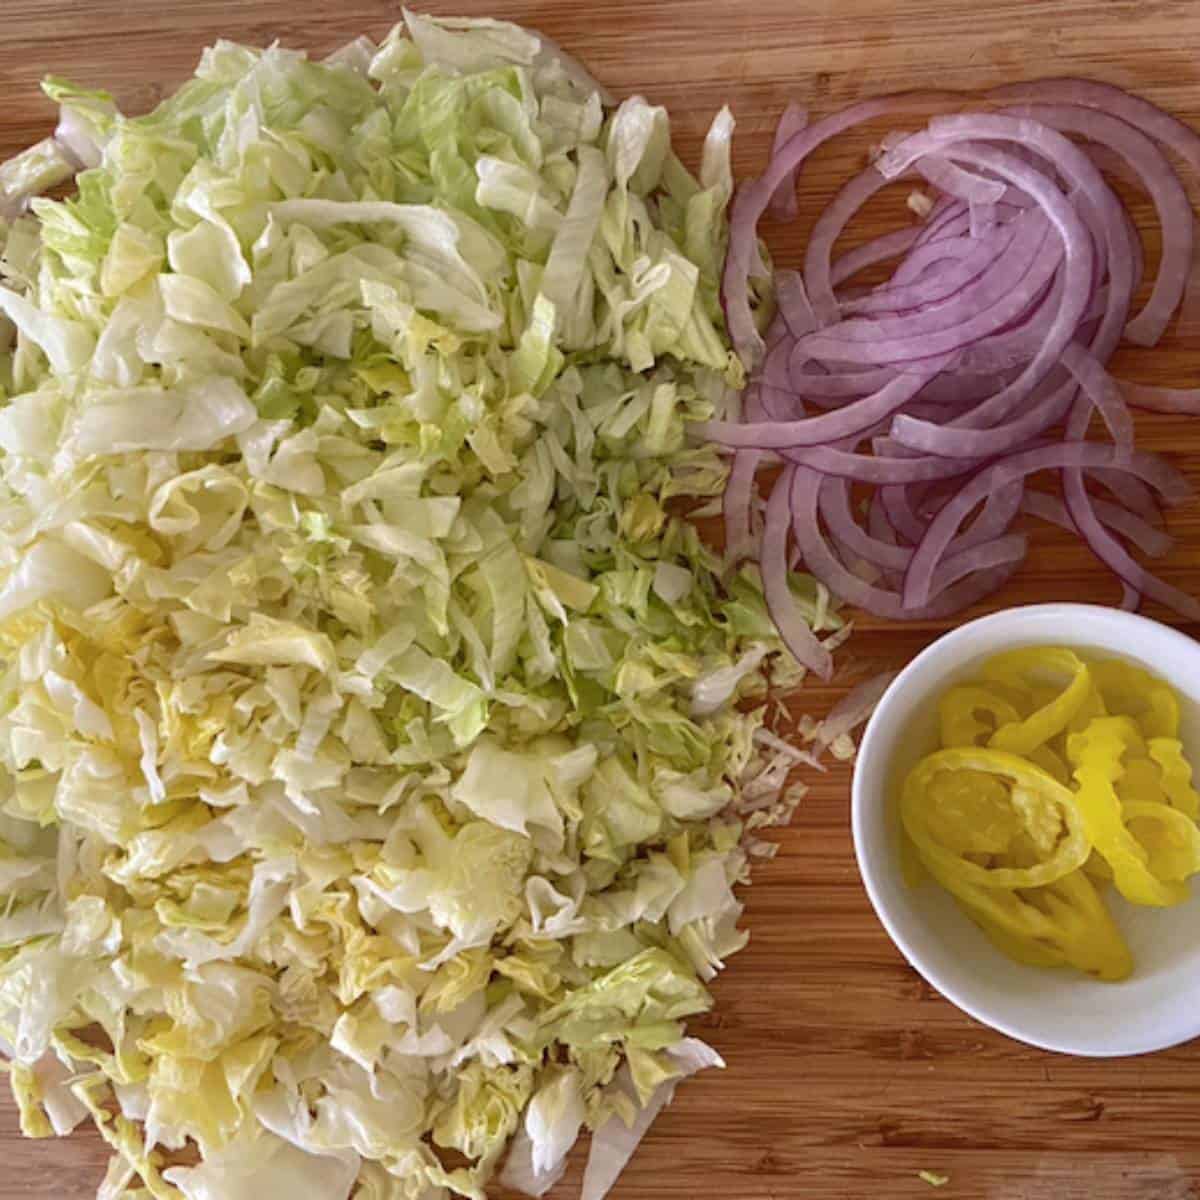 Chopped lettuce, onion and banana peppers on cutting board.